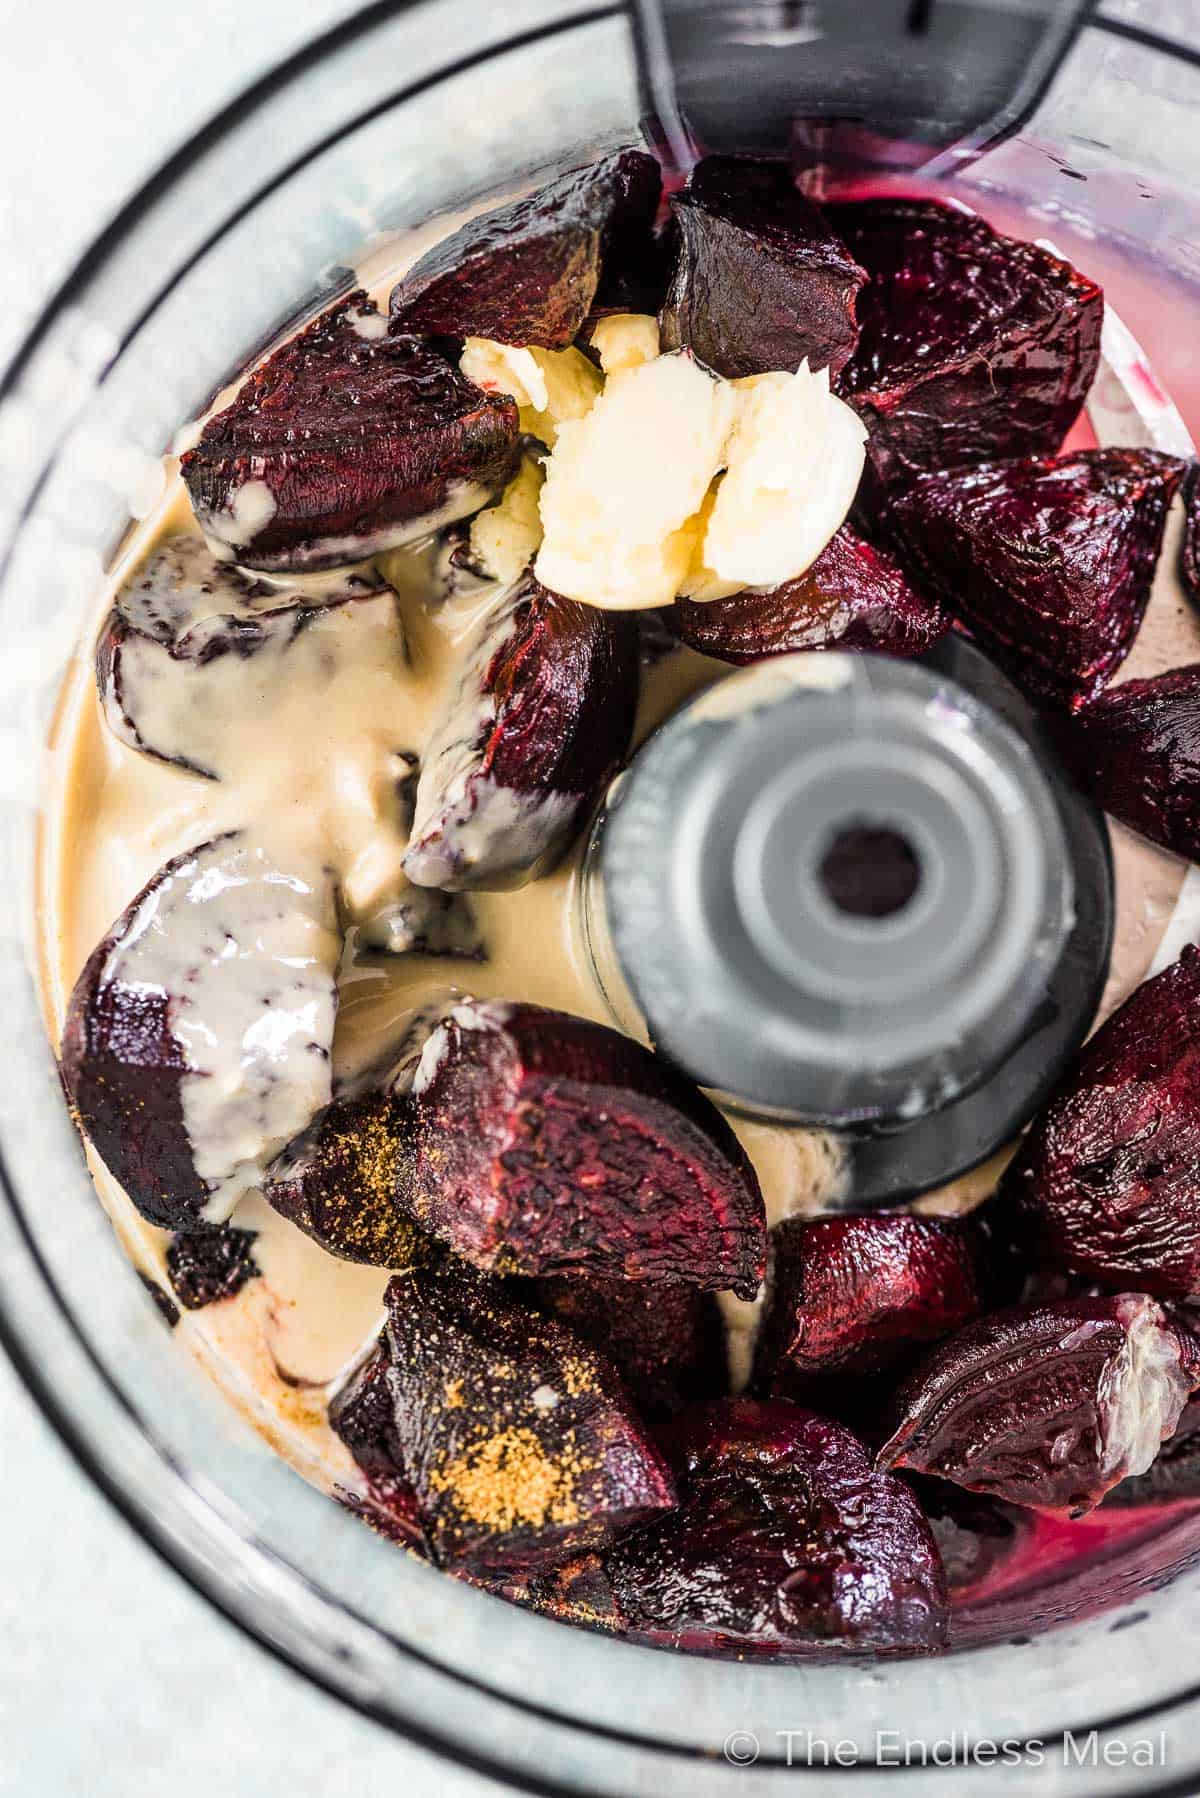 All the ingredients to make this roasted beet hummus in a food processor.